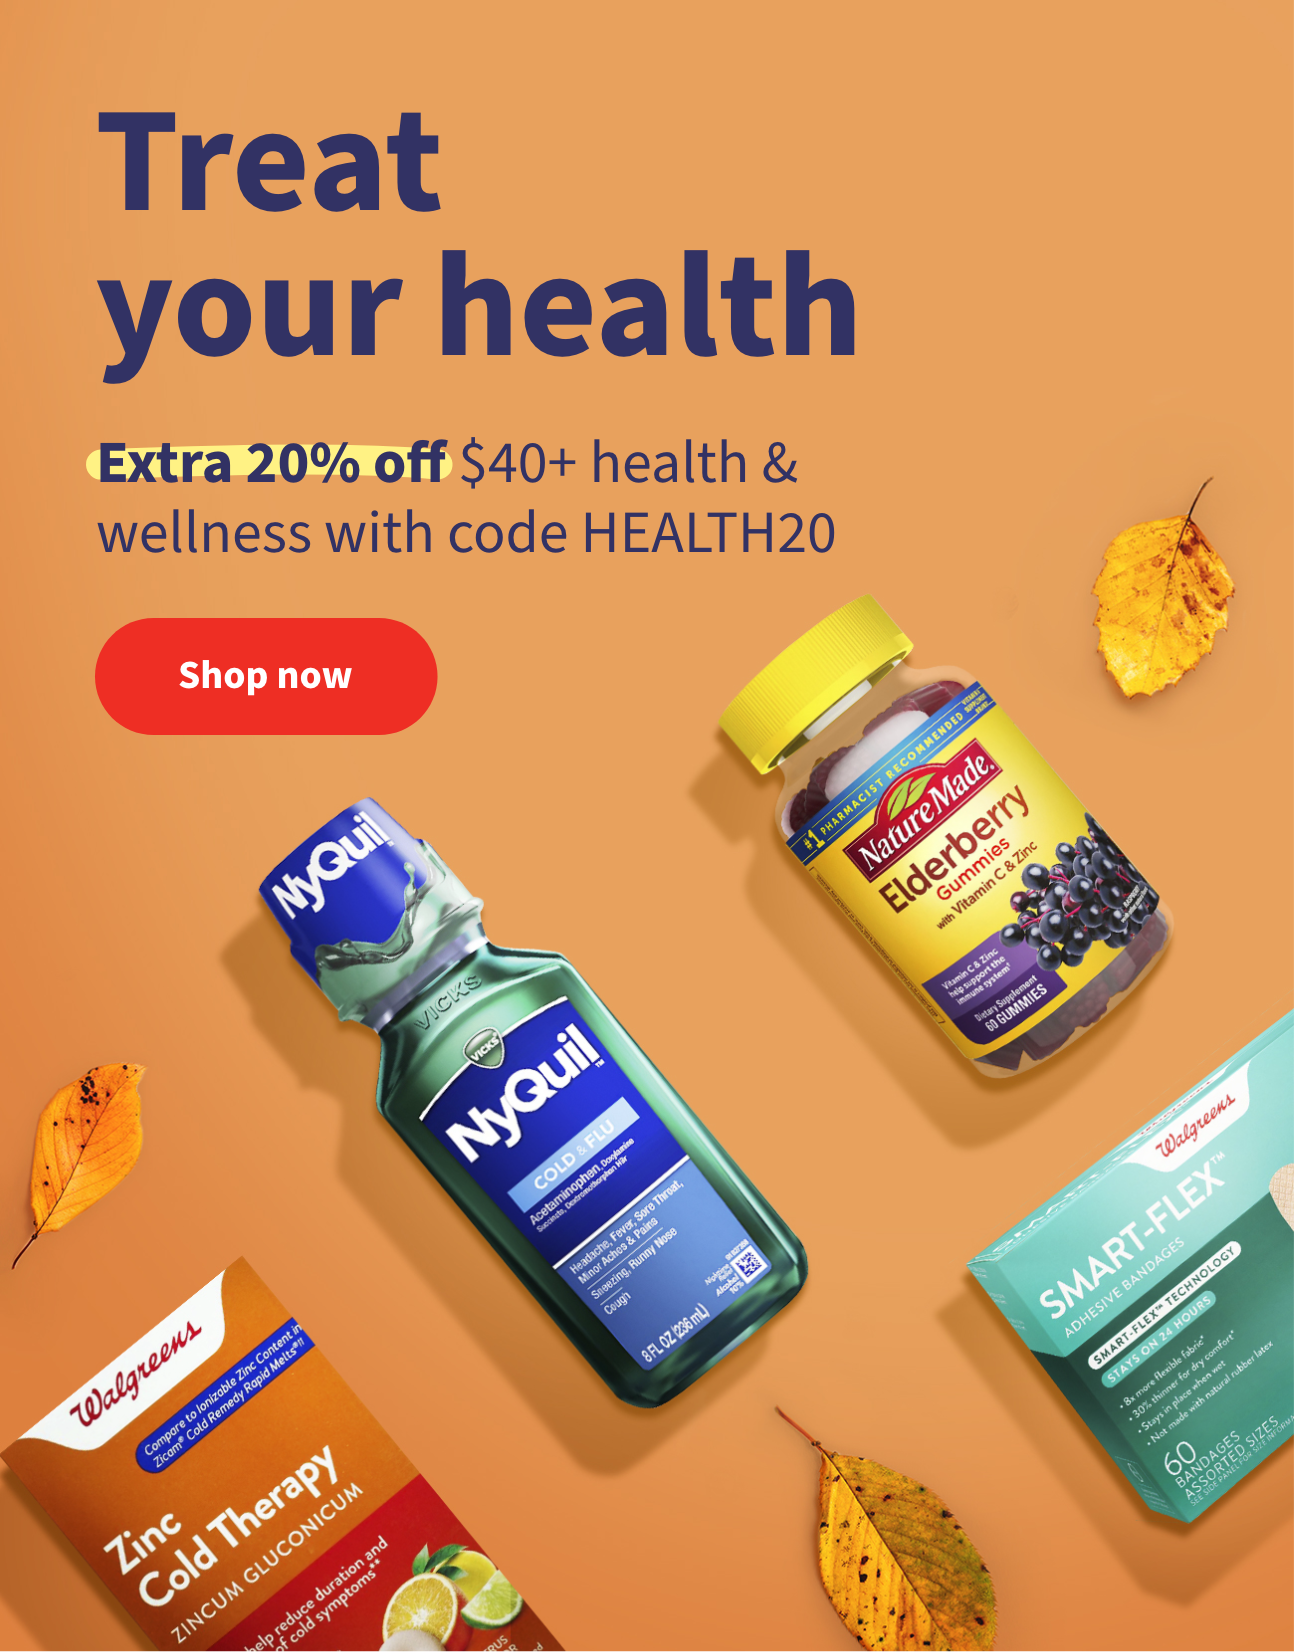 Treat your health. Extra 20% off $40+ health & wellness with code HEALTH20. Shop now